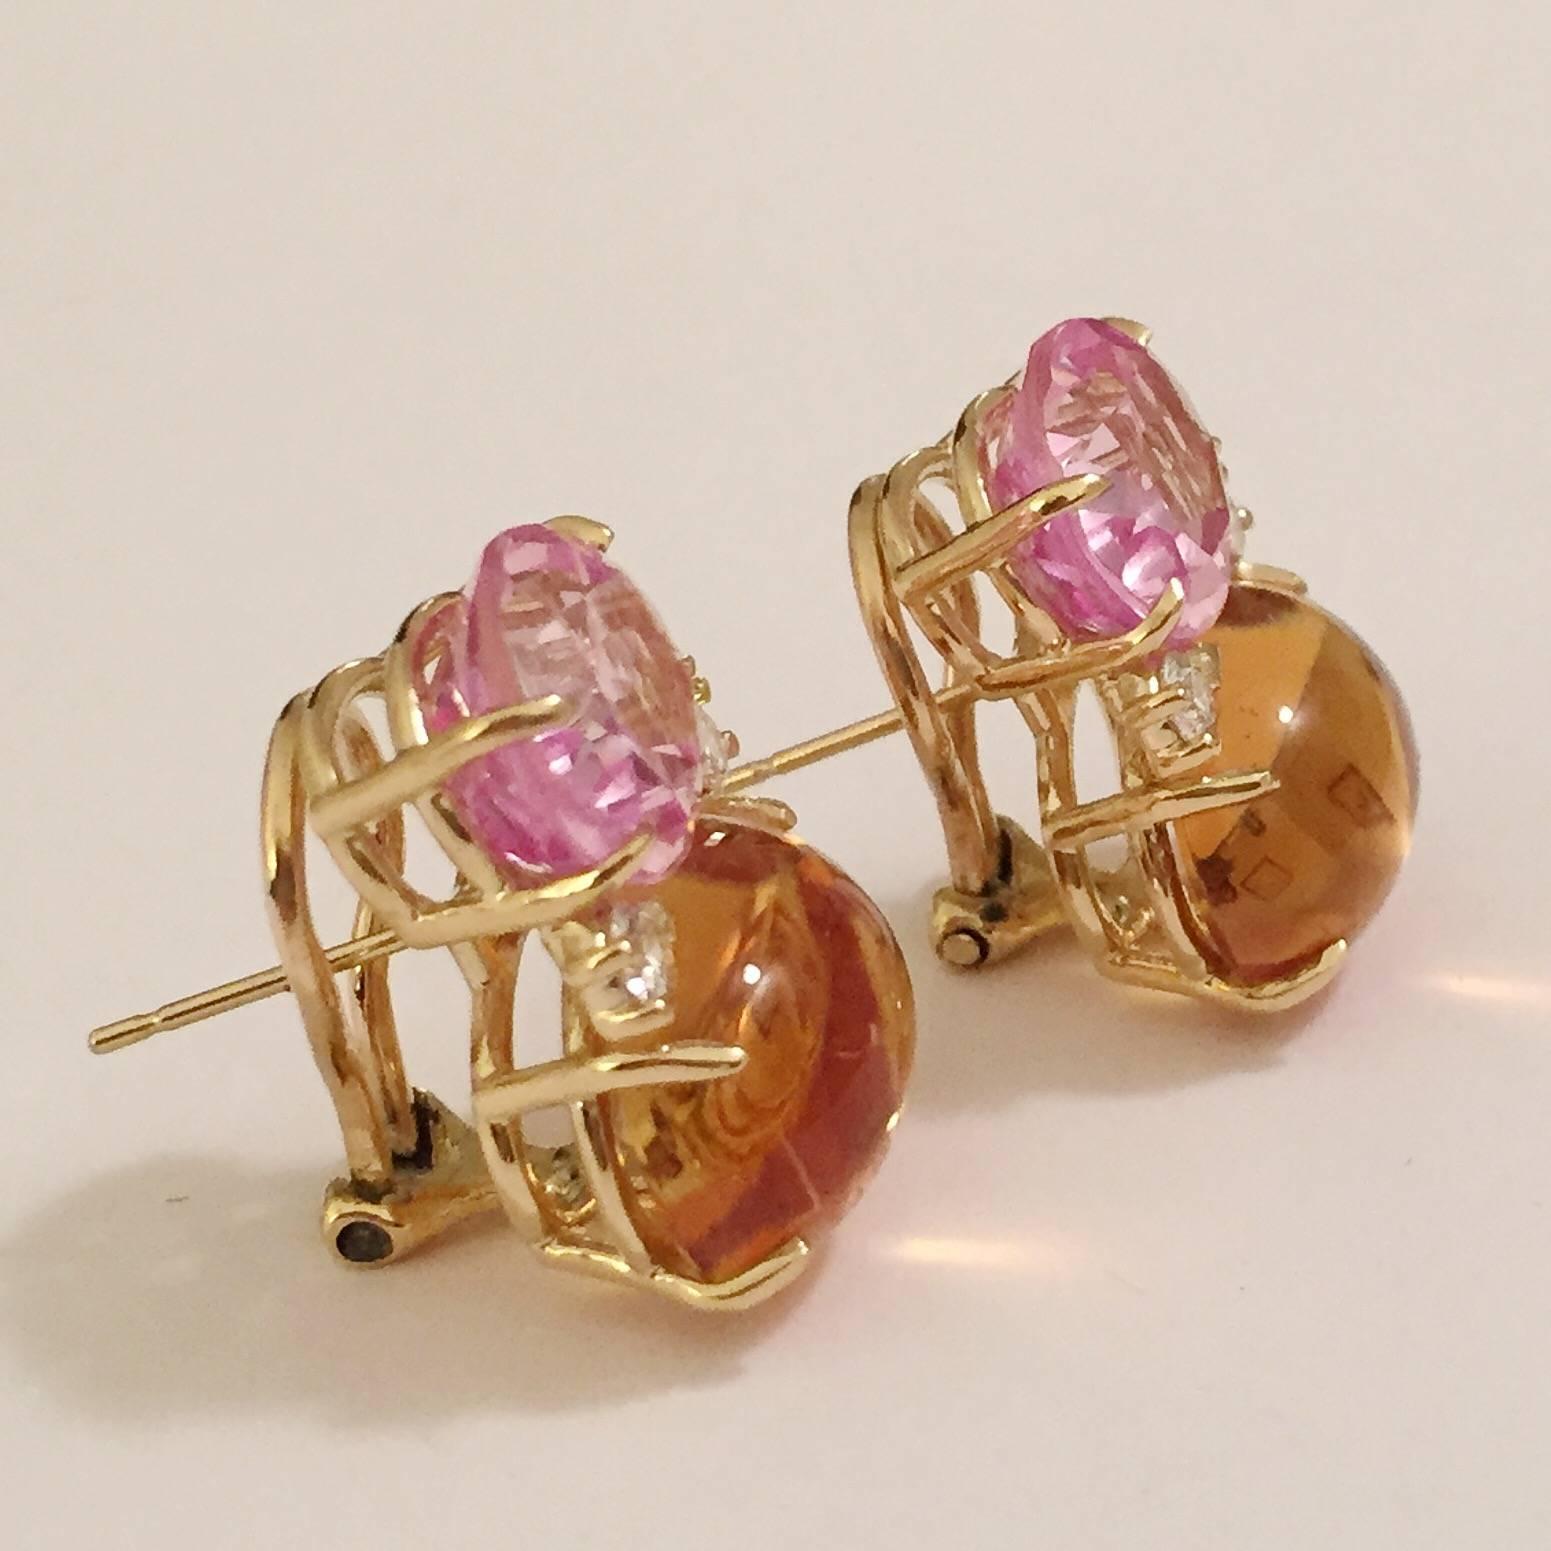 18kt Yellow Gold Large GUM DROP™ Earrings with faceted Citrine and Cabochon Pink Topaz and diamonds.  The Citrine is approximately 5 cts each and the Cabochon Pink Topaz is approximately 12 cts each, and 4 diamonds weighing approximately 0.60cts 